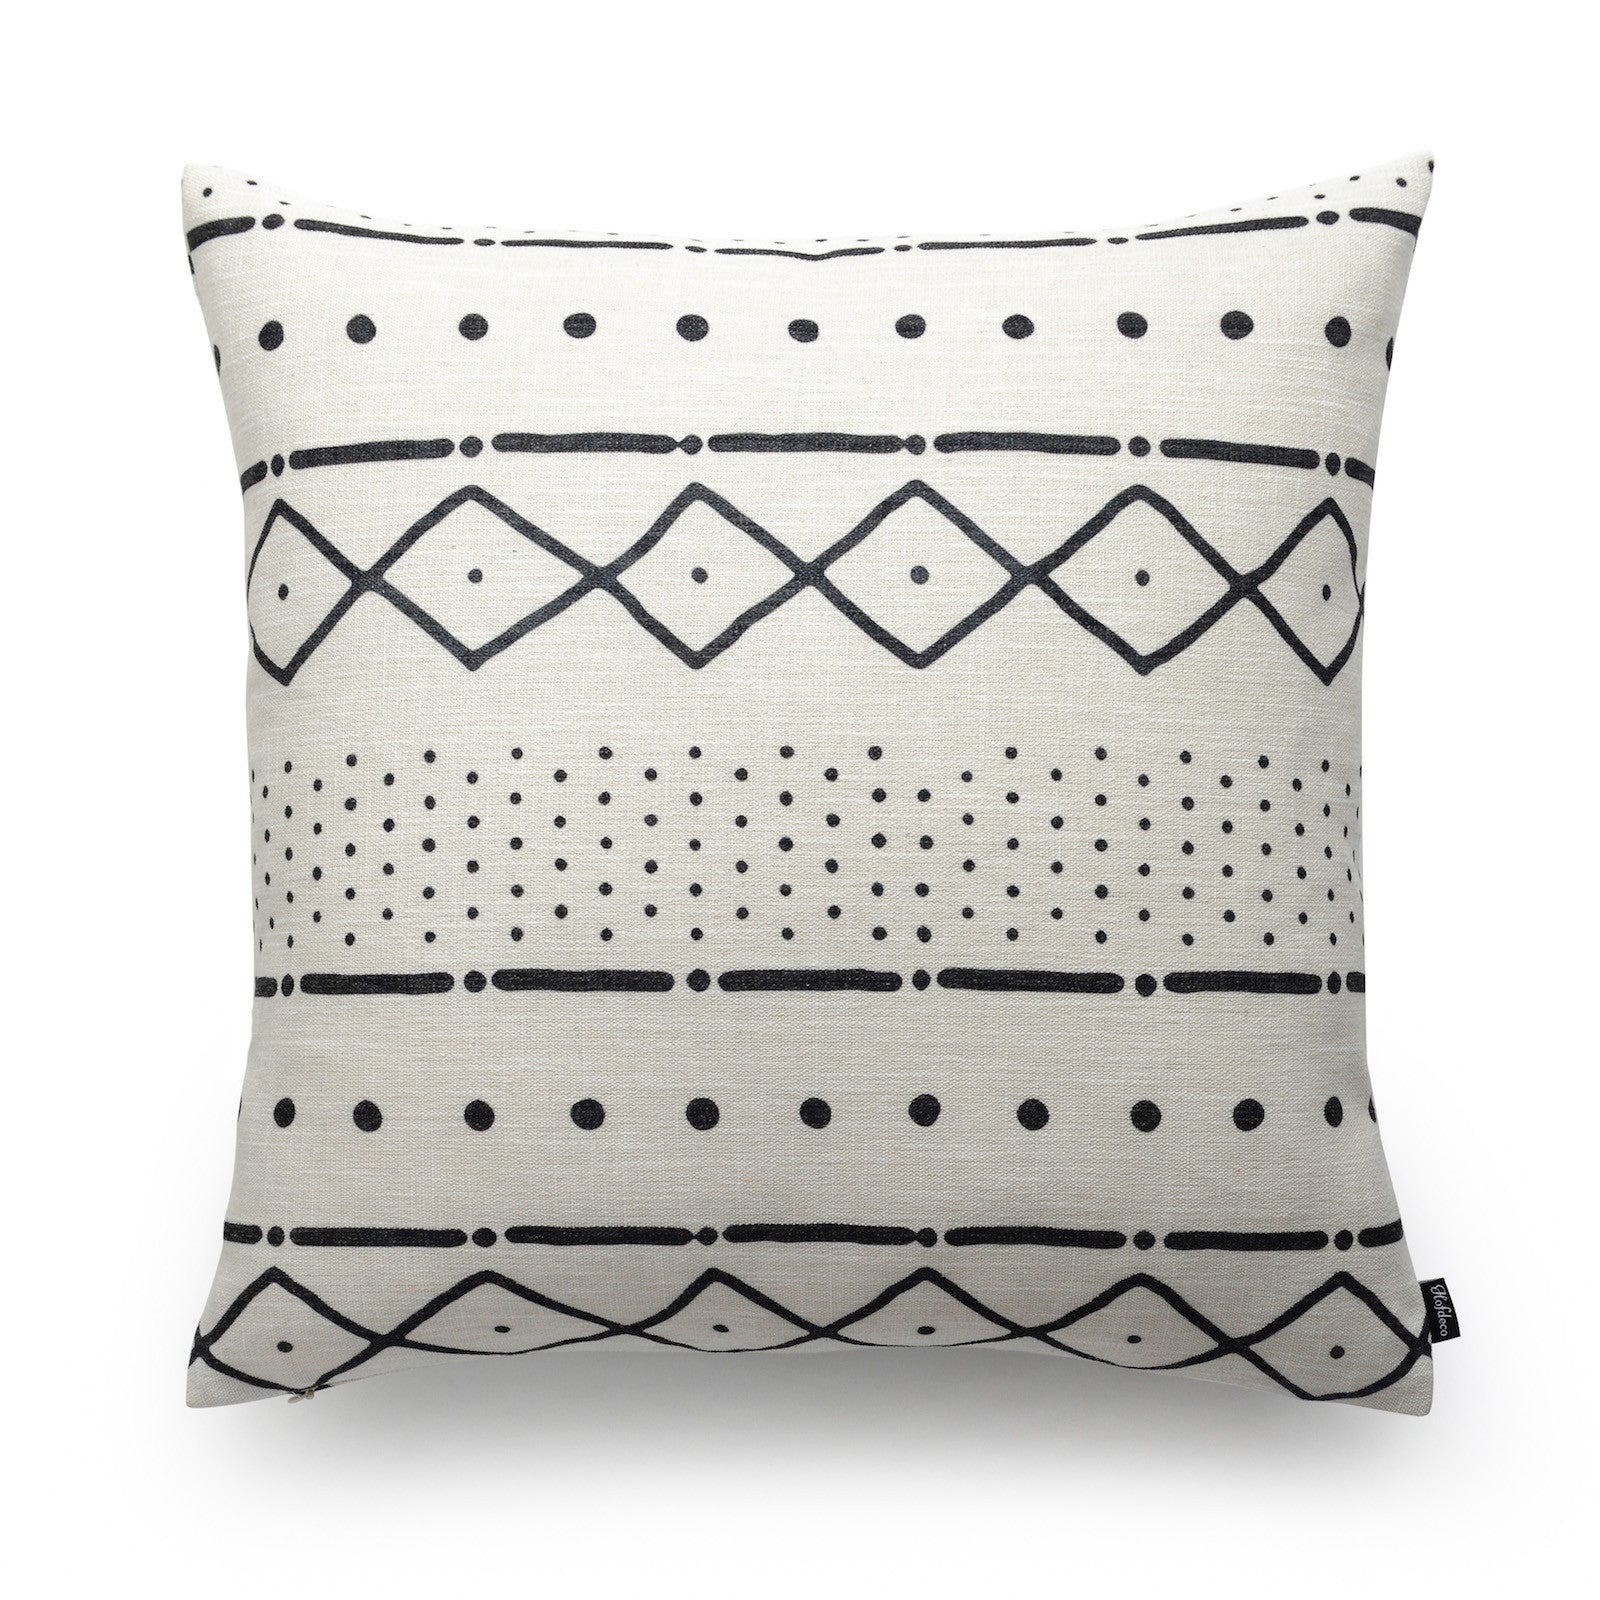 African Mud Cloth Pillow Cover, Dots and Dashes, Natural, Double Sided, 20"x20"